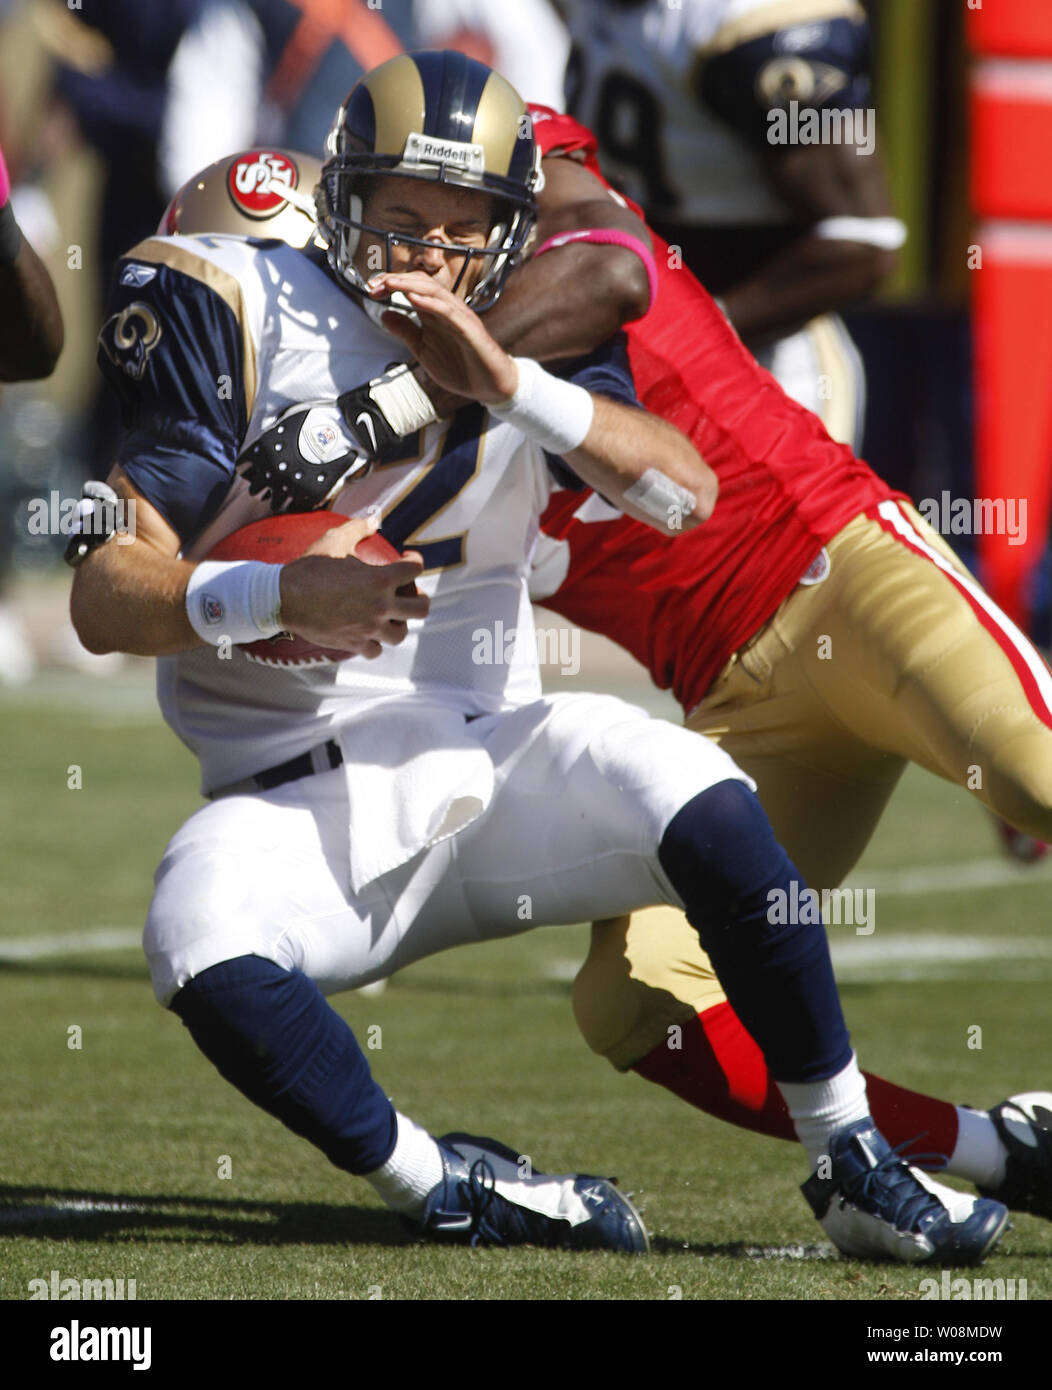 St. Louis Rams QB Kyle Boller (12) is sacked by San Francisco 49ers Manny Lawson at Candlestick Park in San Francisco on October 4, 2009. The 49ers defeated the Rams 35-0.    UPI/Terry Schmitt Stock Photo